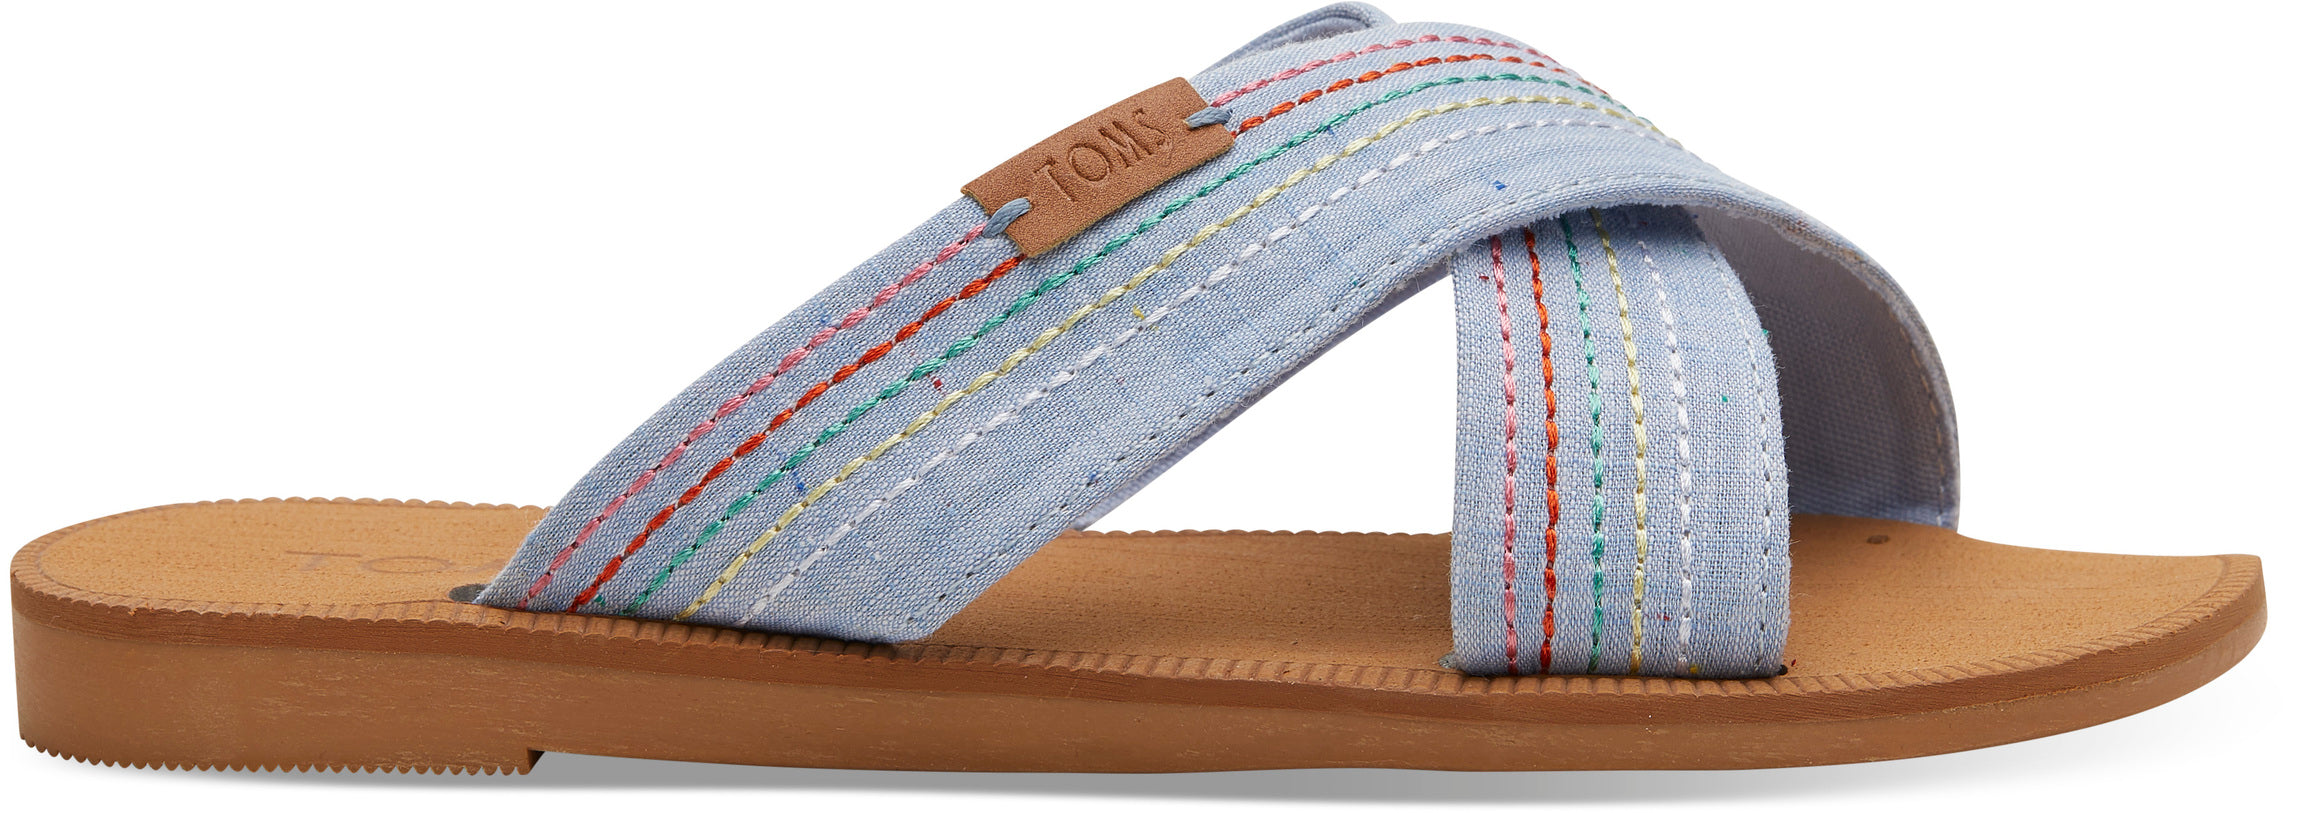 Light Bliss Blue Speckled Chambray/Deco Stitch YOUTH Viv Sand